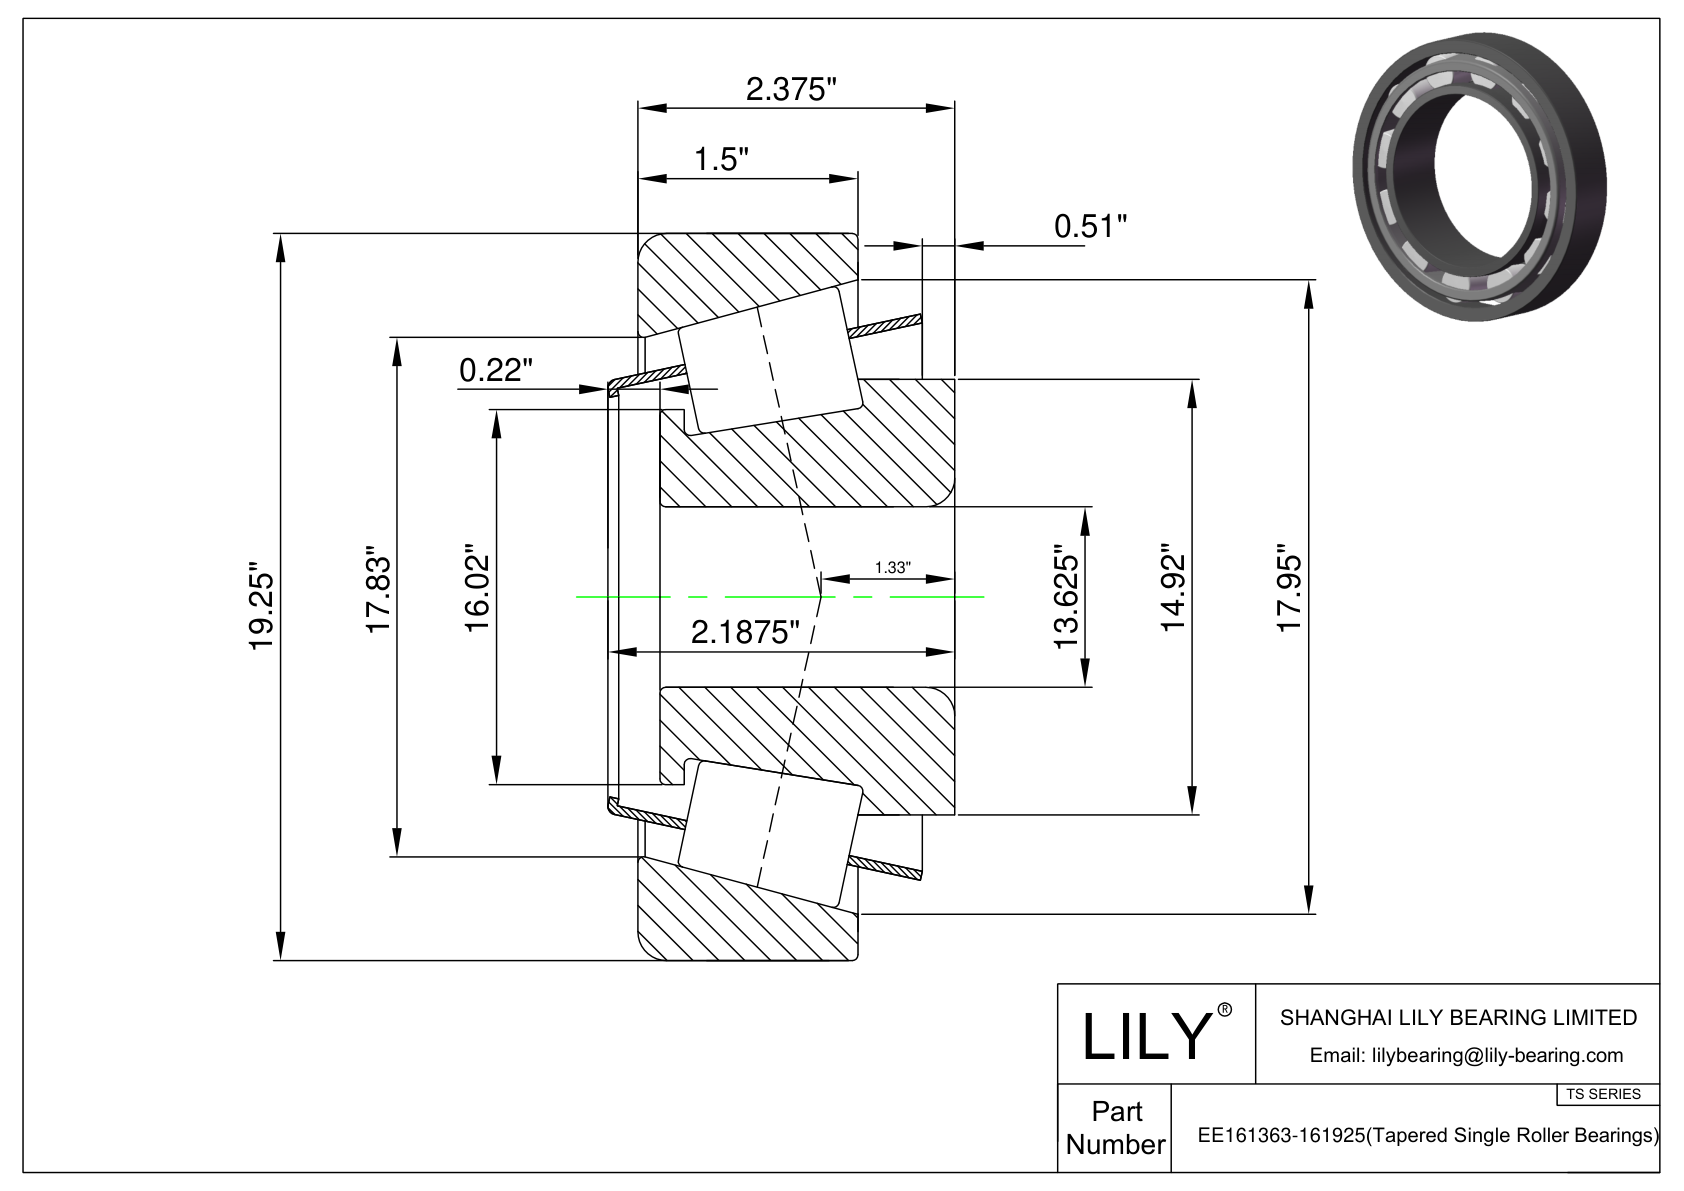 EE161363-161925 TS (Tapered Single Roller Bearings) (Imperial) cad drawing